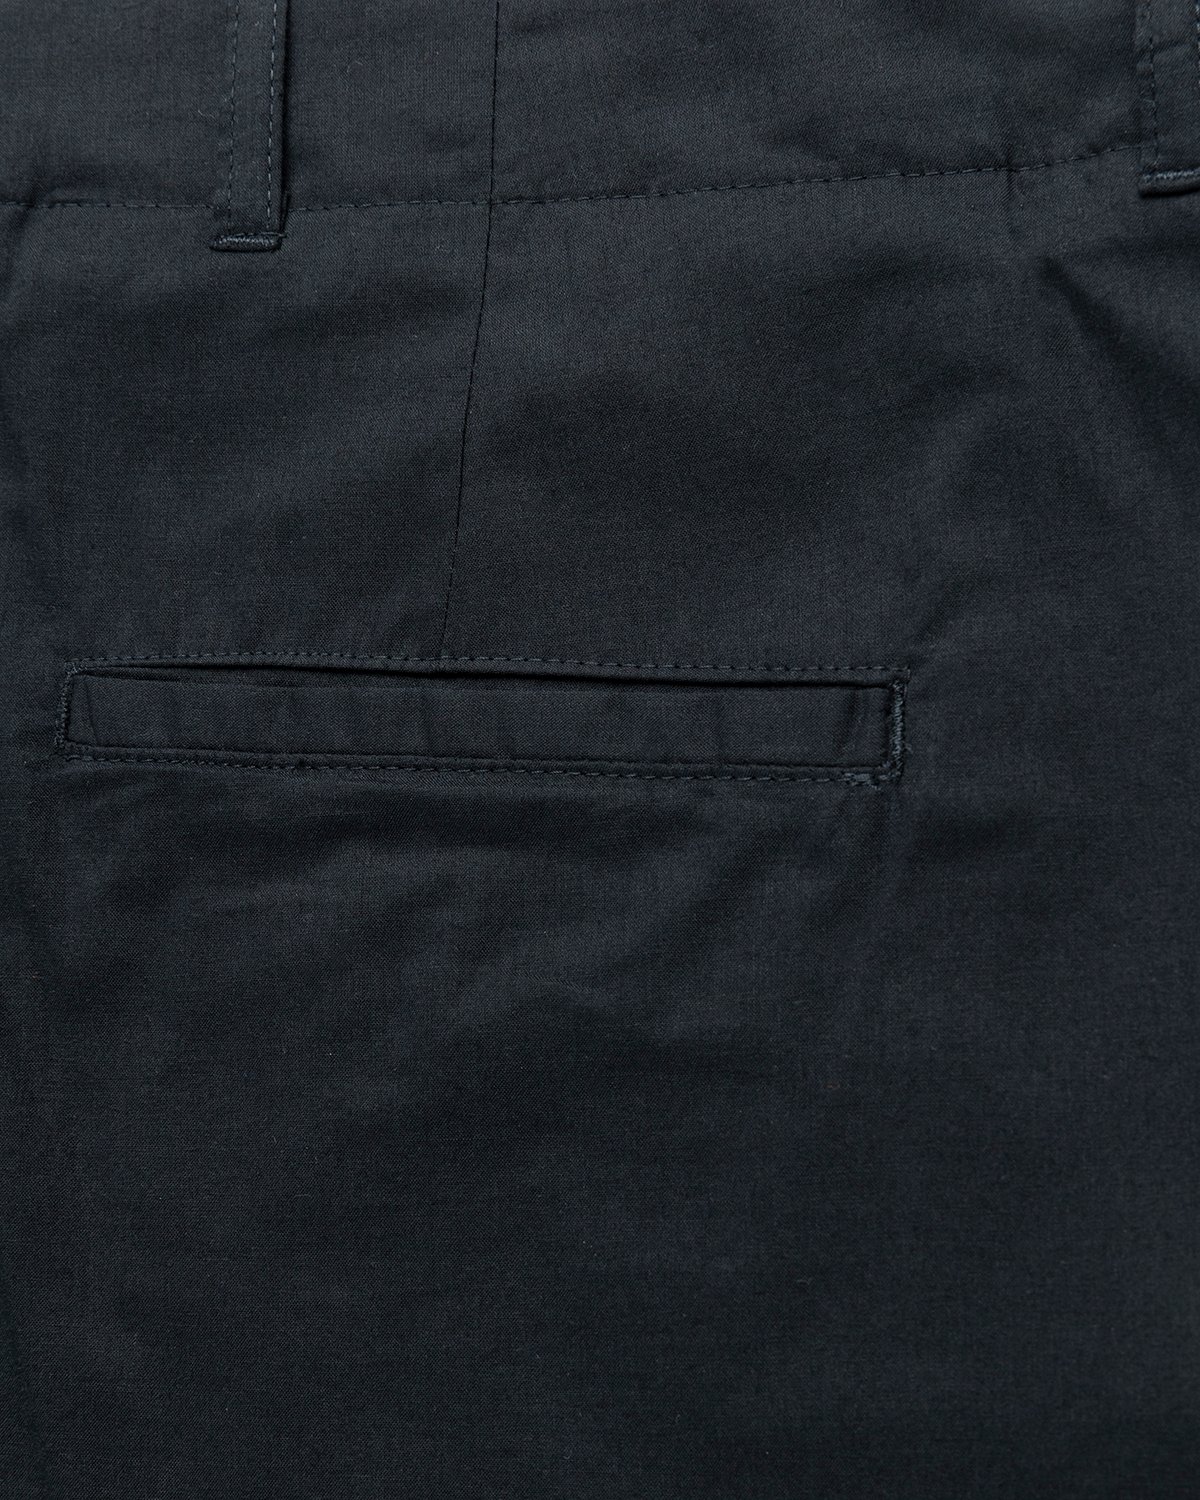 Our Legacy - Borrowed Chino Black Voile - Clothing - Black - Image 4